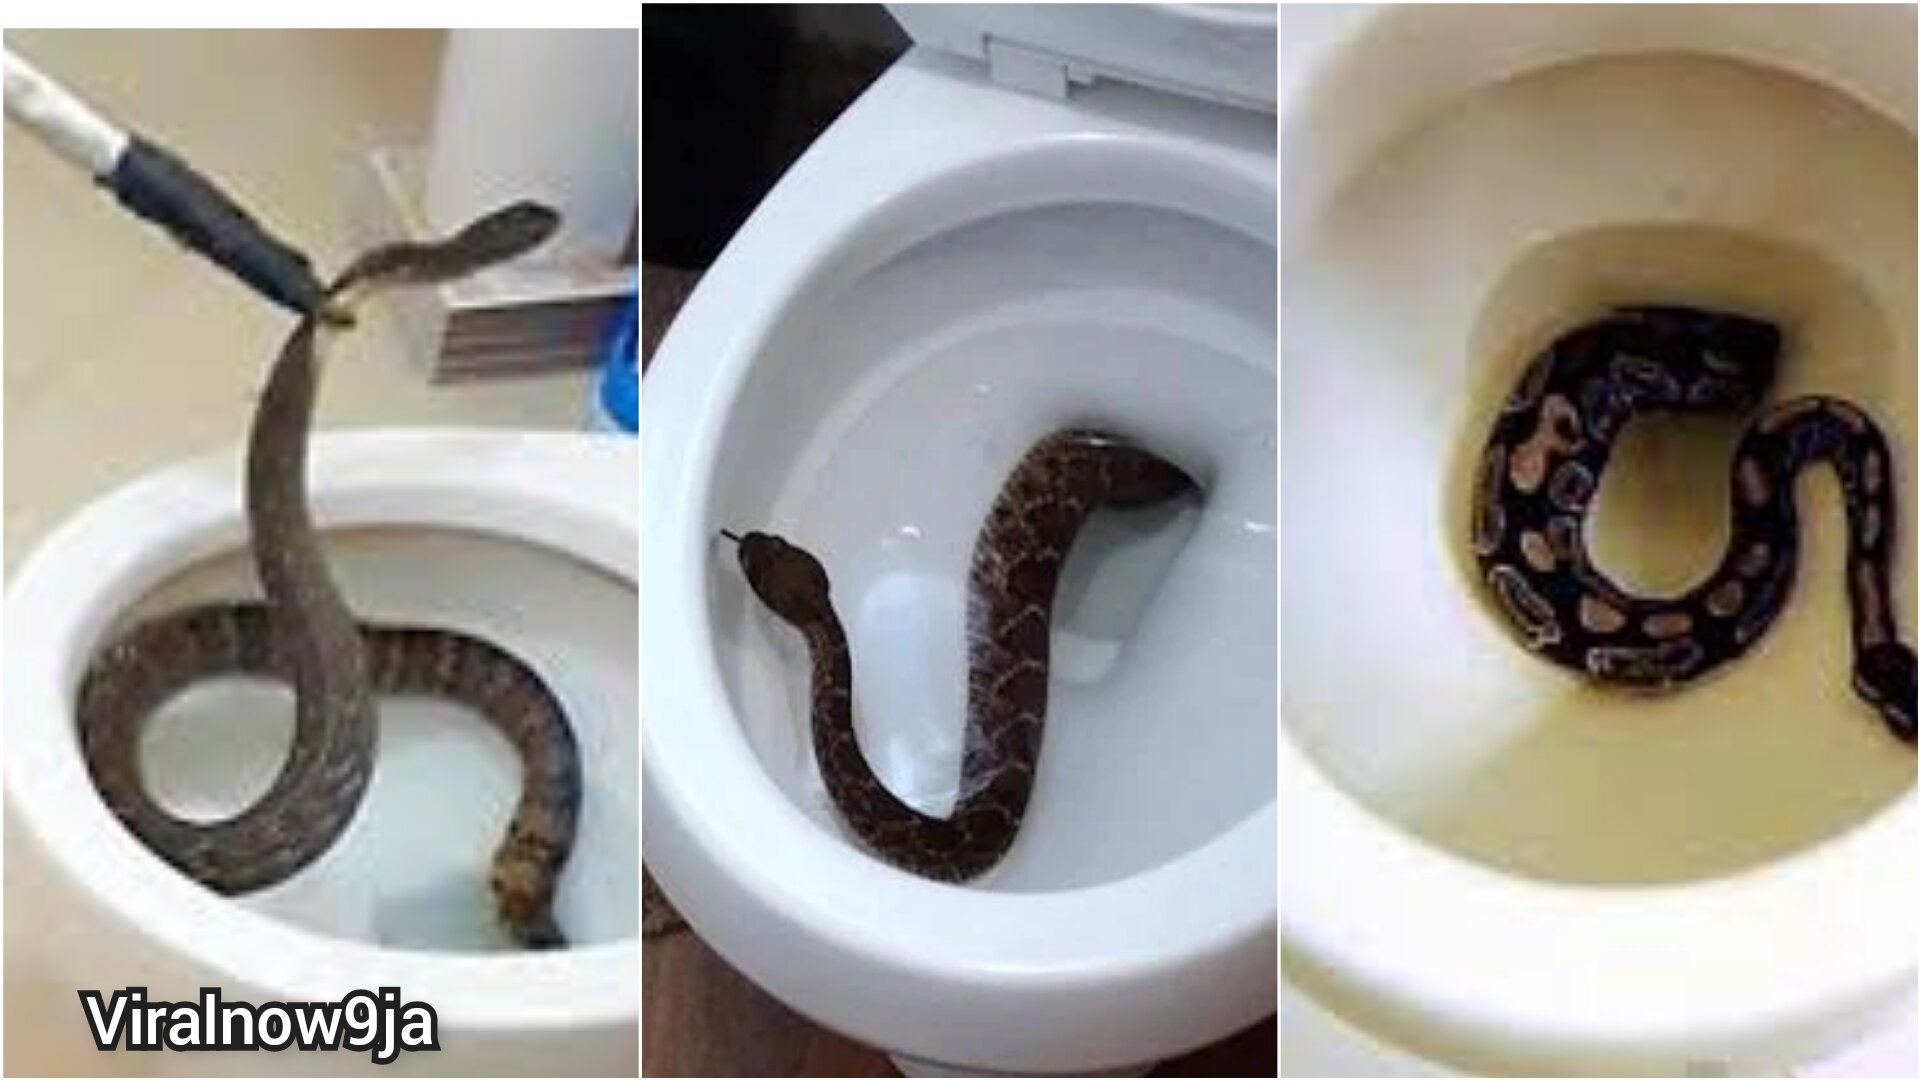 How do snakes get in toilets